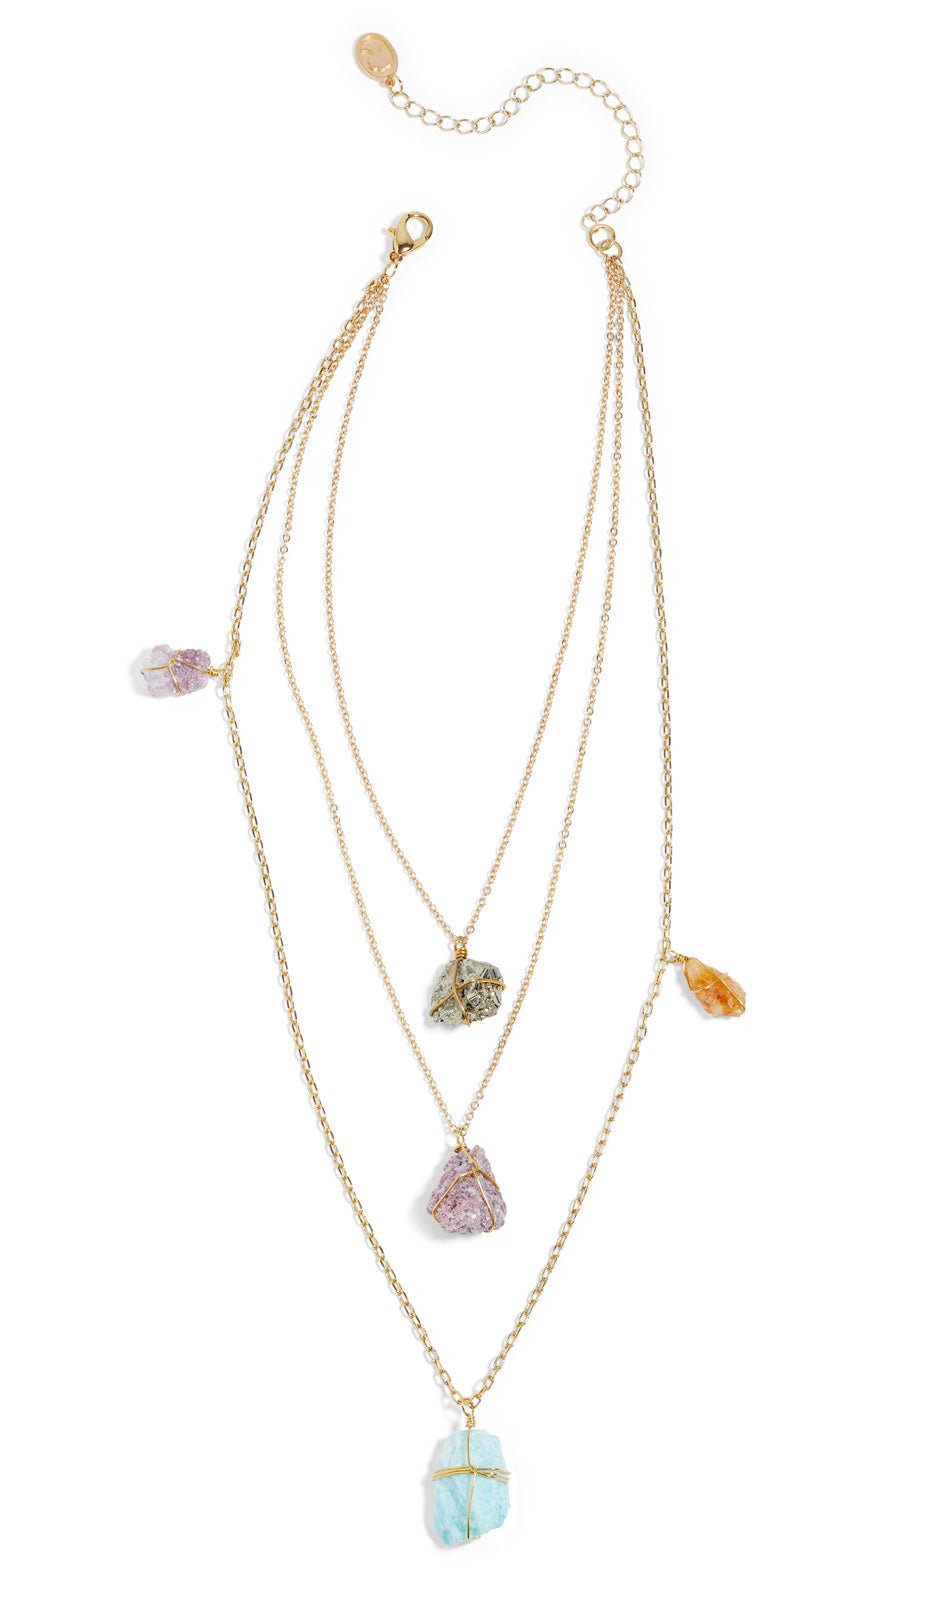 Perfect Healing Crystal Delicate Layered Necklace - Ariana Ost